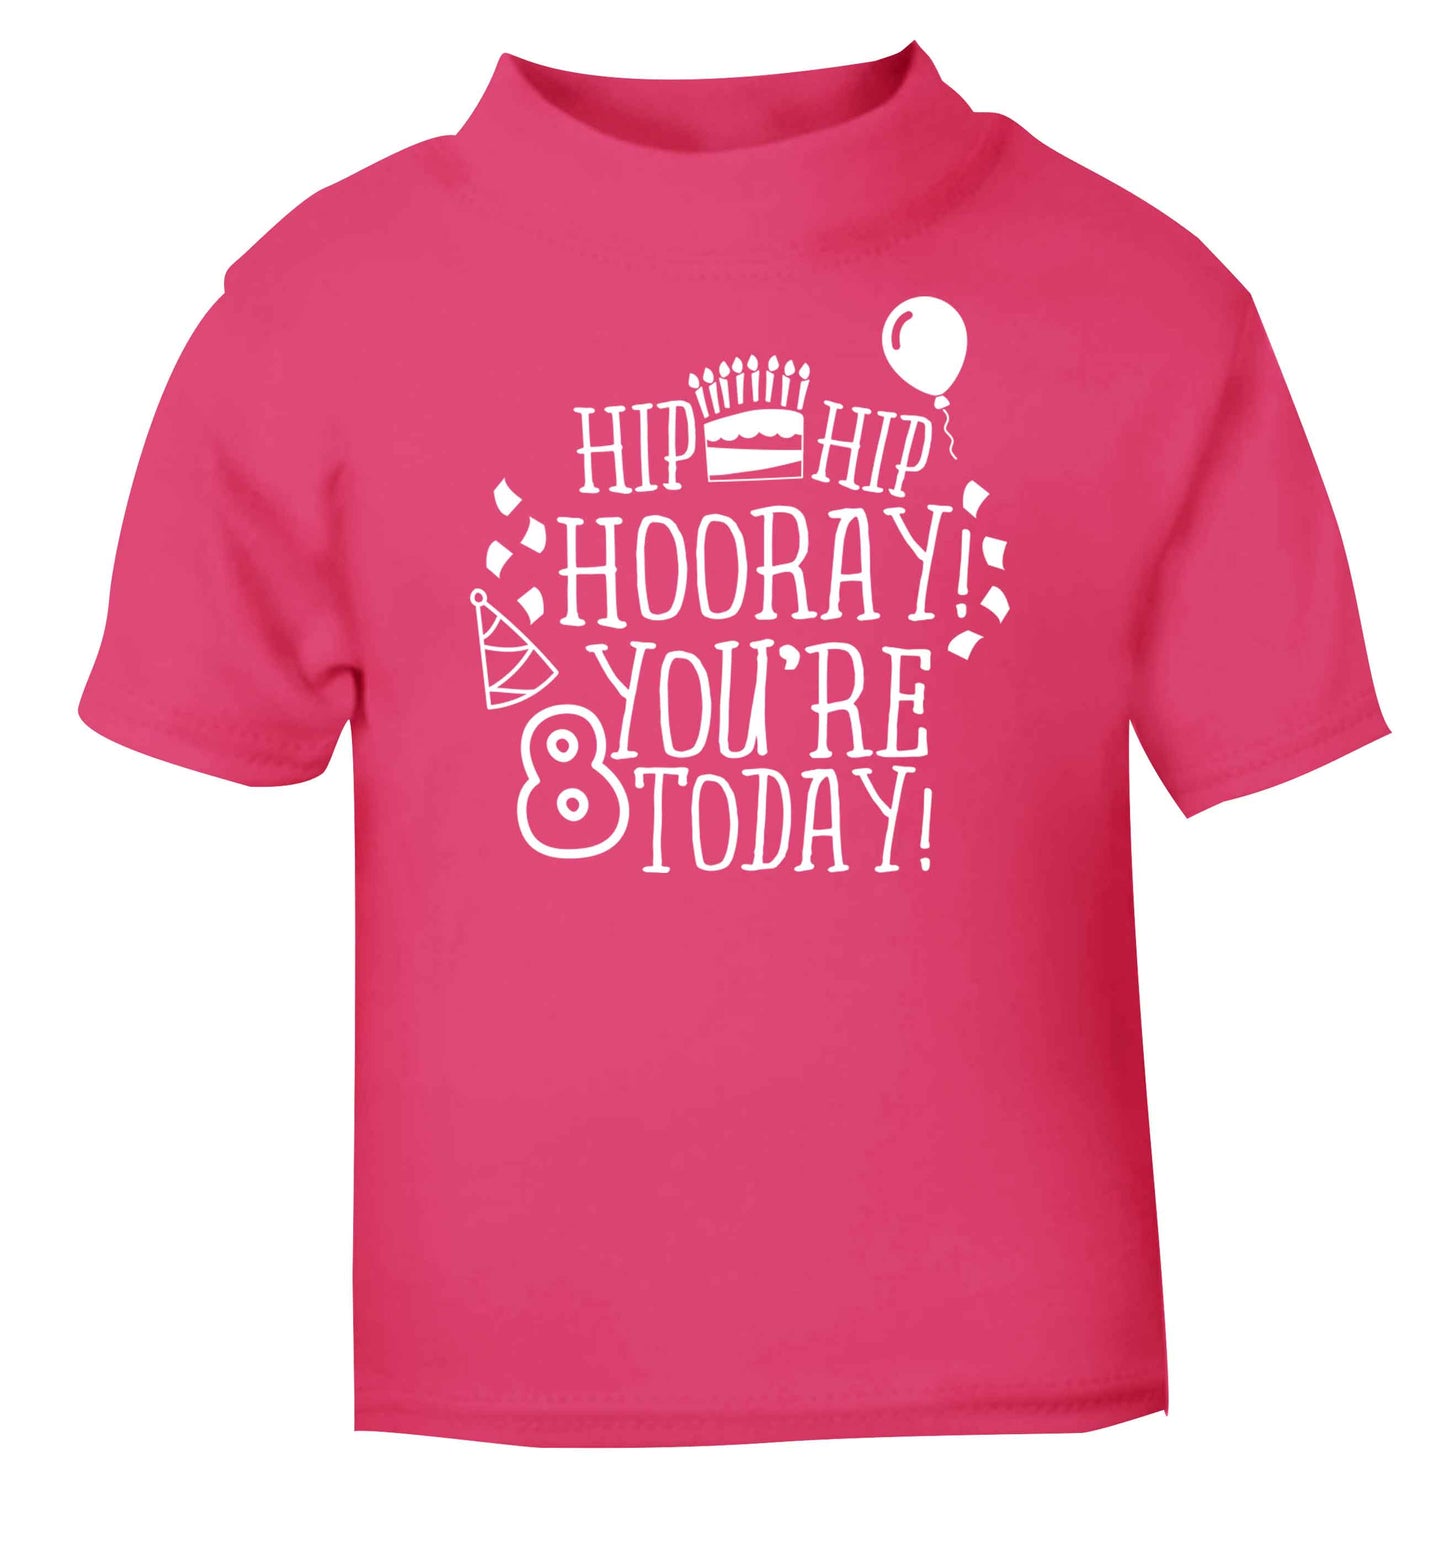 Hip hip hooray you're 8 today! pink baby toddler Tshirt 2 Years